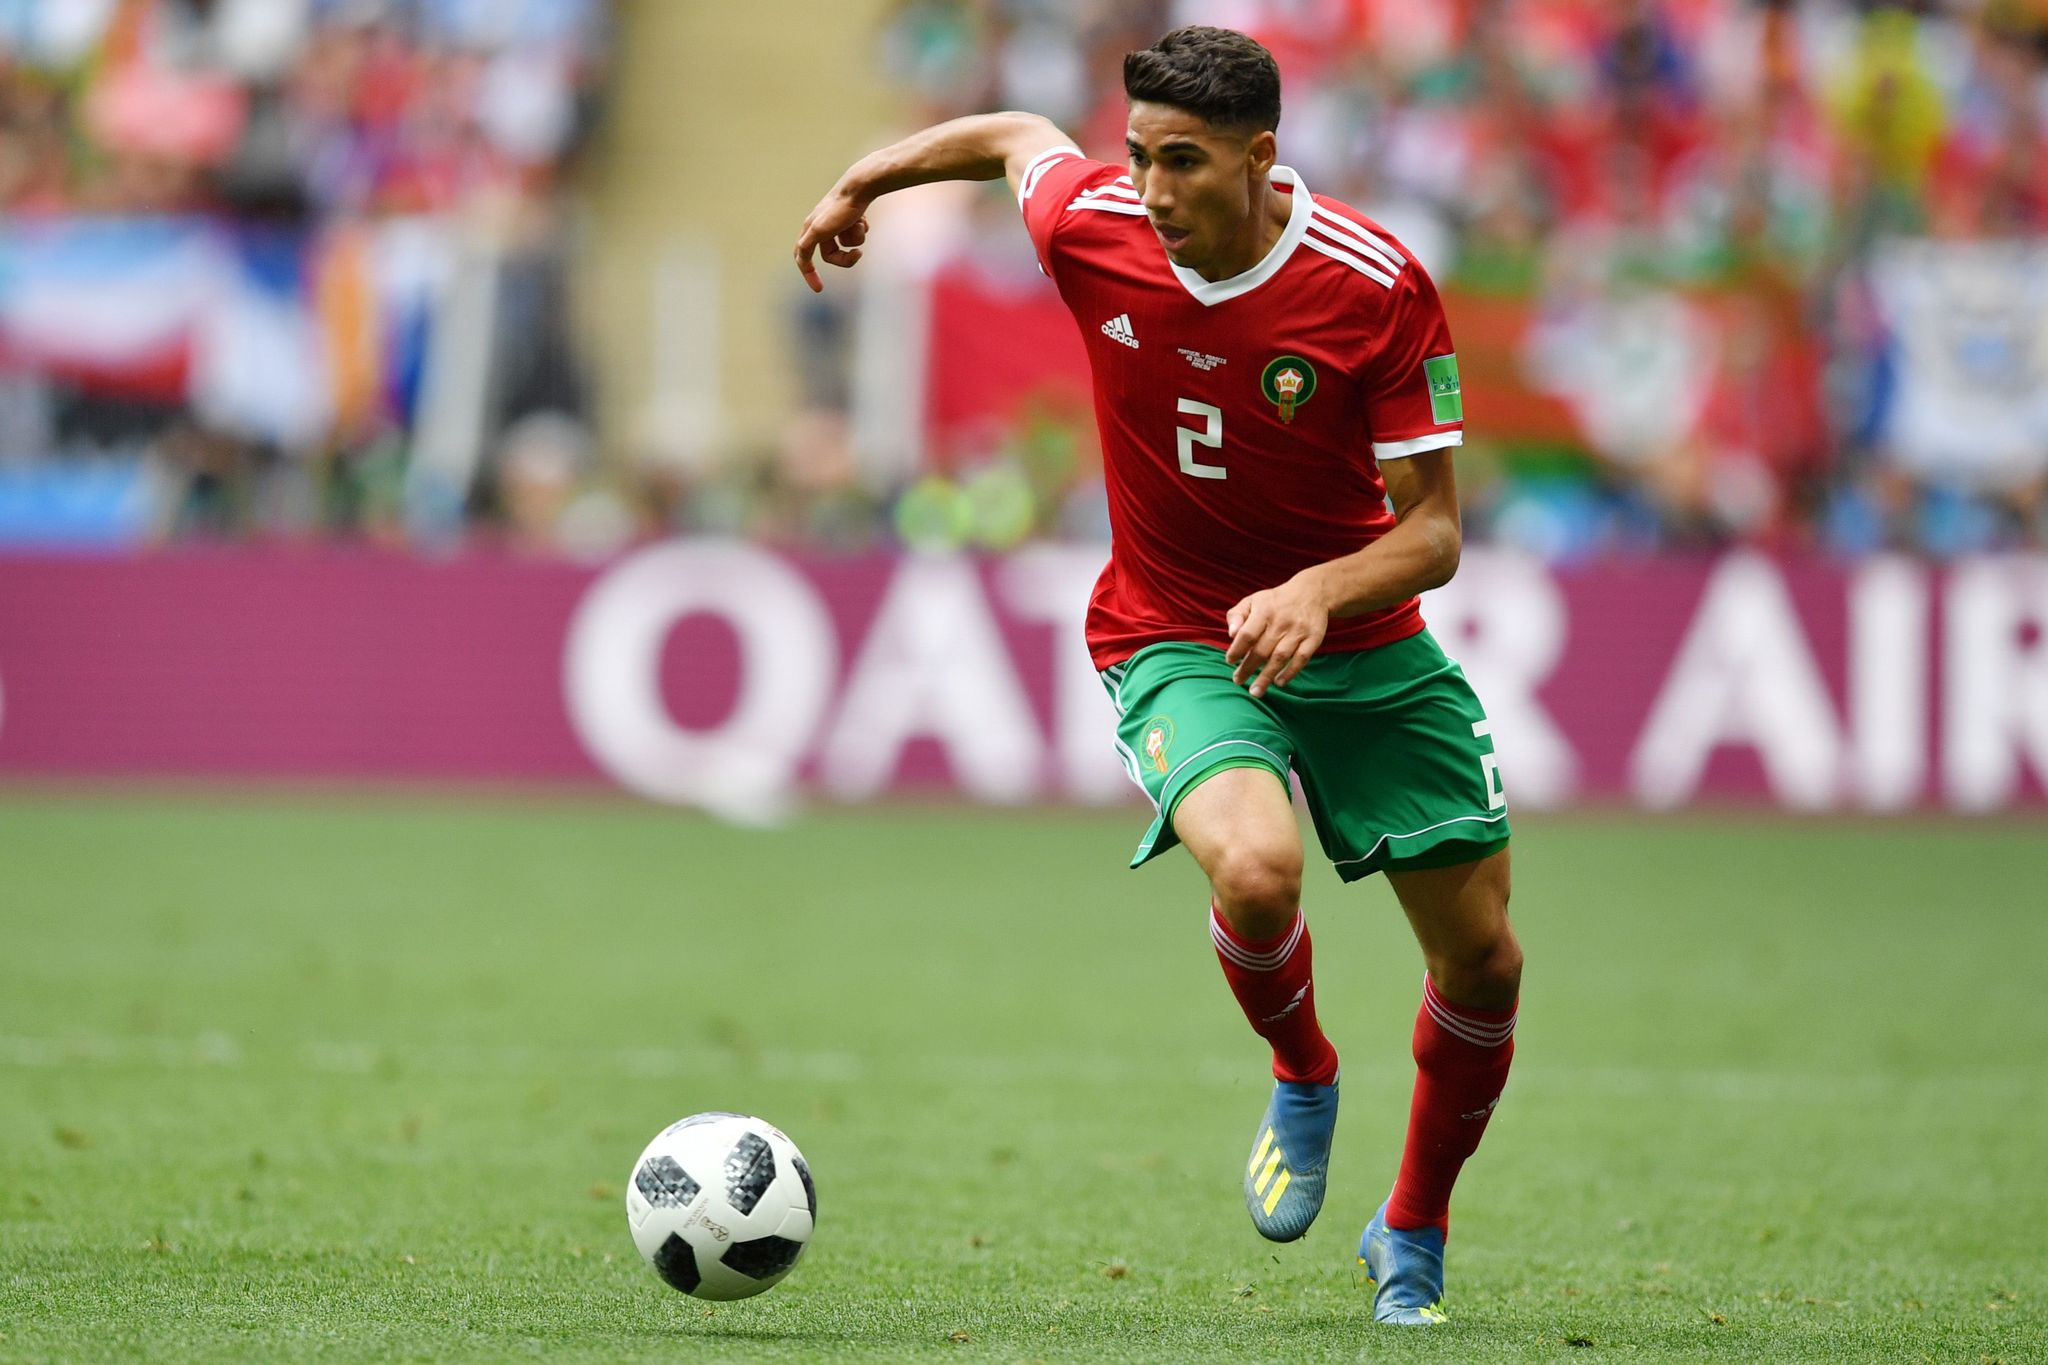 Moroccos defender <HIT>Achraf</HIT> Hakimi runs with the ball during the Russia 2018 World Cup Group B football match between Portugal and Morocco at the Luzhniki Stadium in Moscow on June 20, 2018. / AFP PHOTO / Yuri CORTEZ / RESTRICTED TO EDITORIAL USE - NO MOBILE PUSH ALERTS/DOWNLOADS